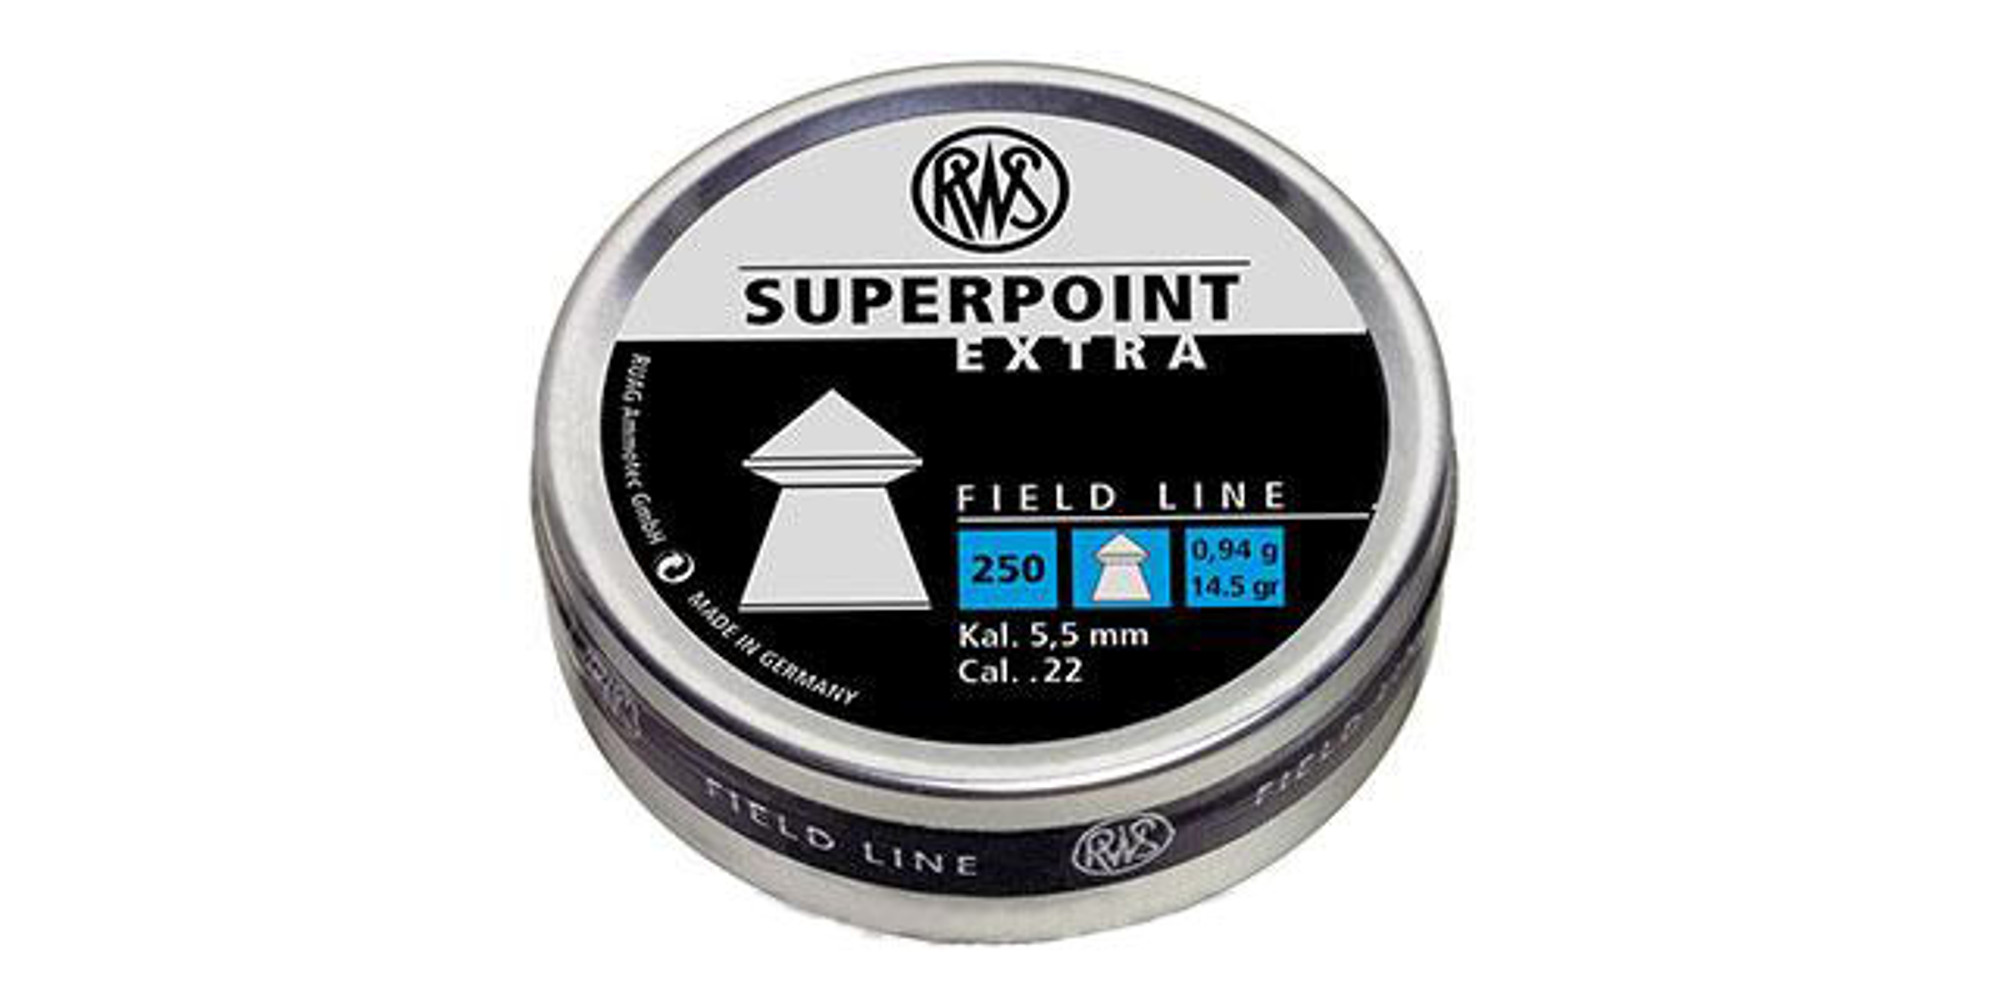 RWS Hobby Superpoint .22 cal. Pellets - 250 count